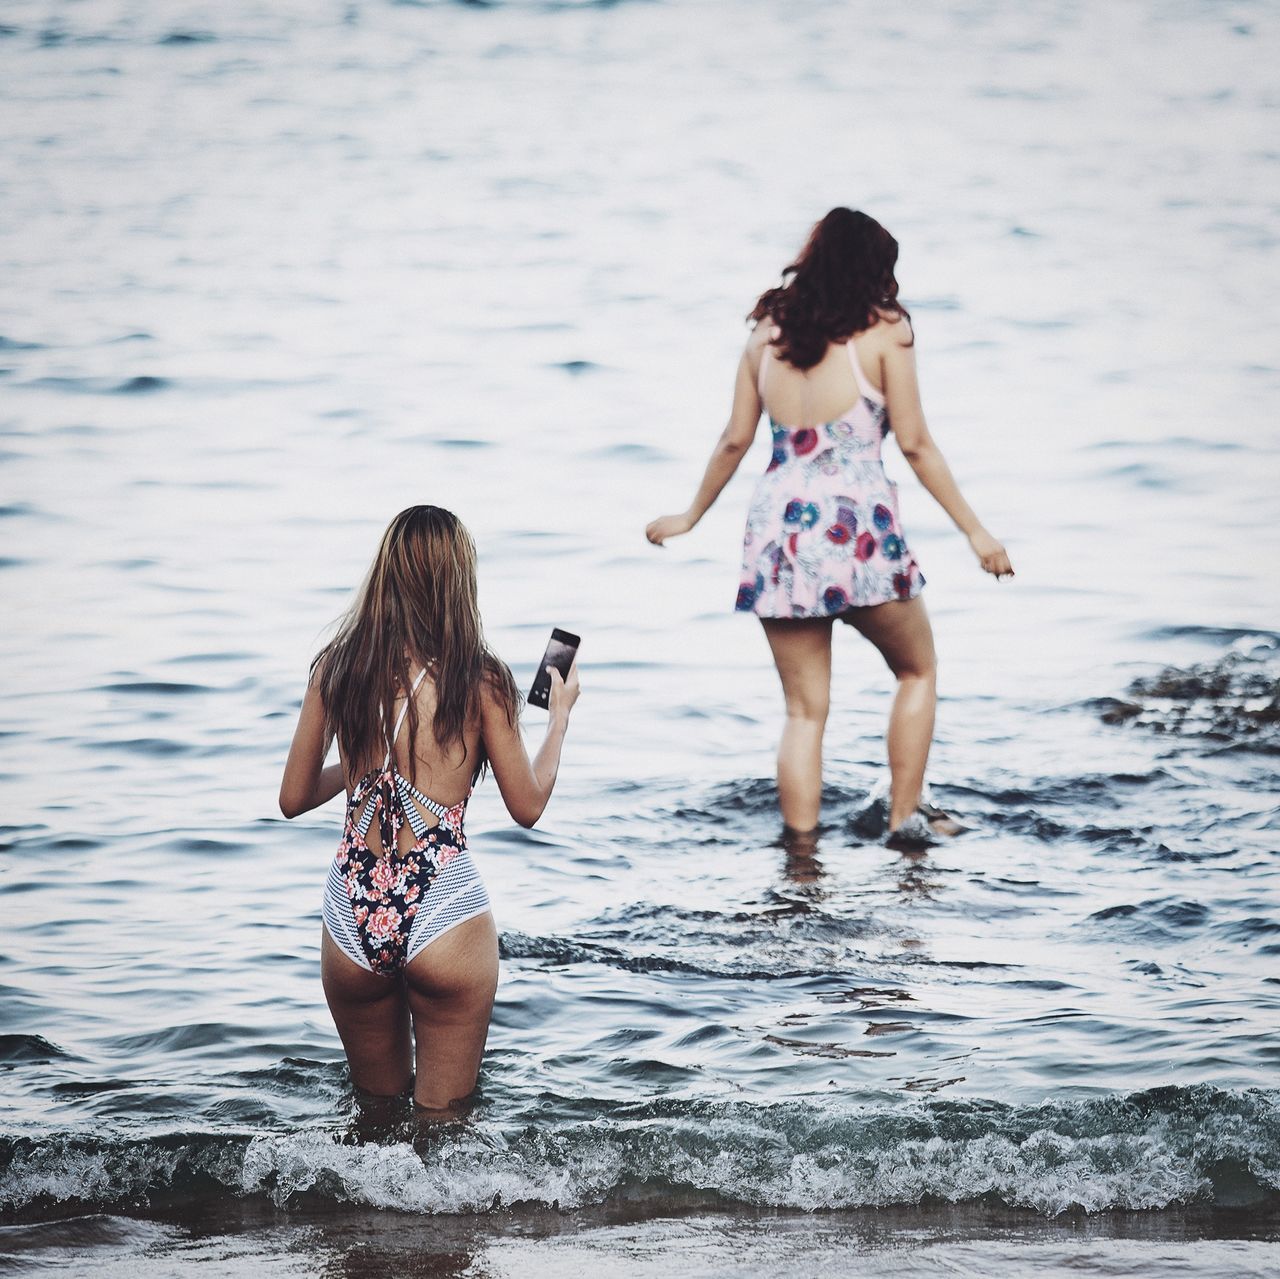 water, real people, women, lifestyles, leisure activity, full length, two people, people, long hair, togetherness, rear view, sea, adult, child, family, day, nature, swimwear, hairstyle, hair, outdoors, sister